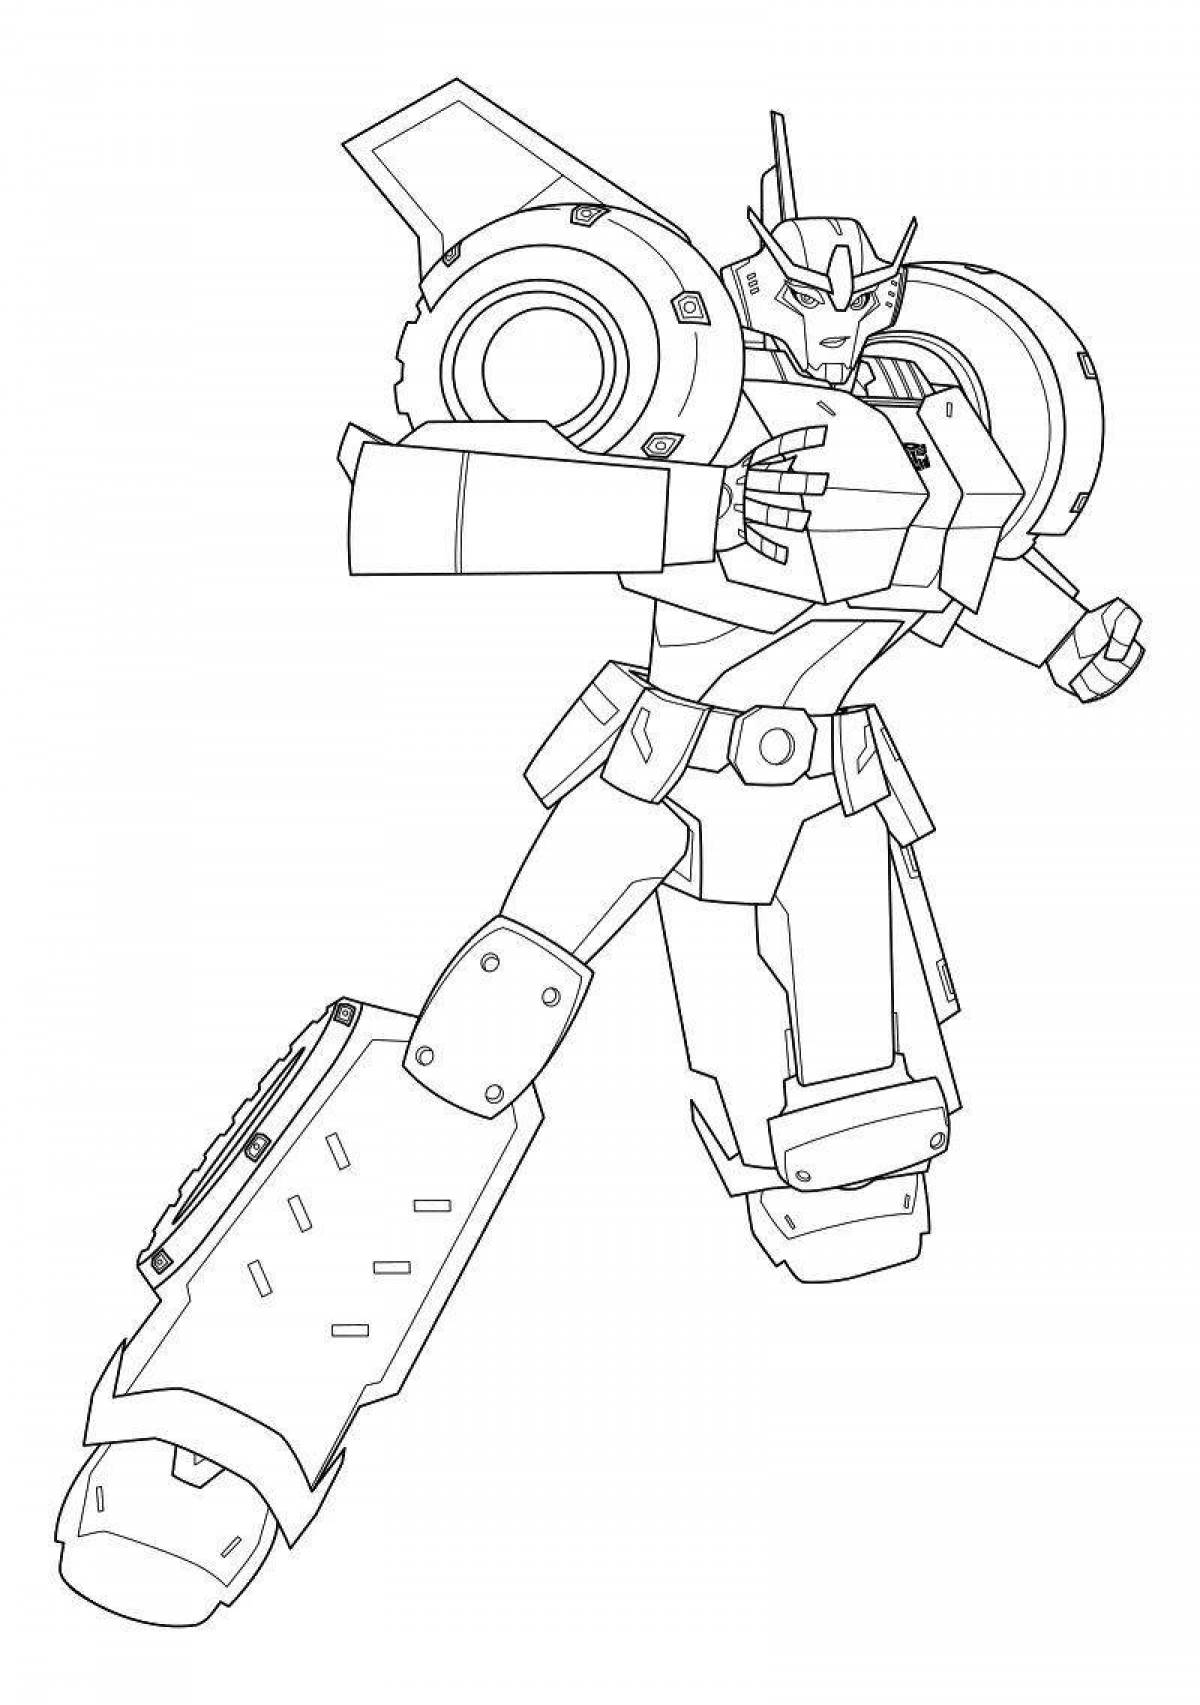 Vibrant sideswipe transformers coloring page